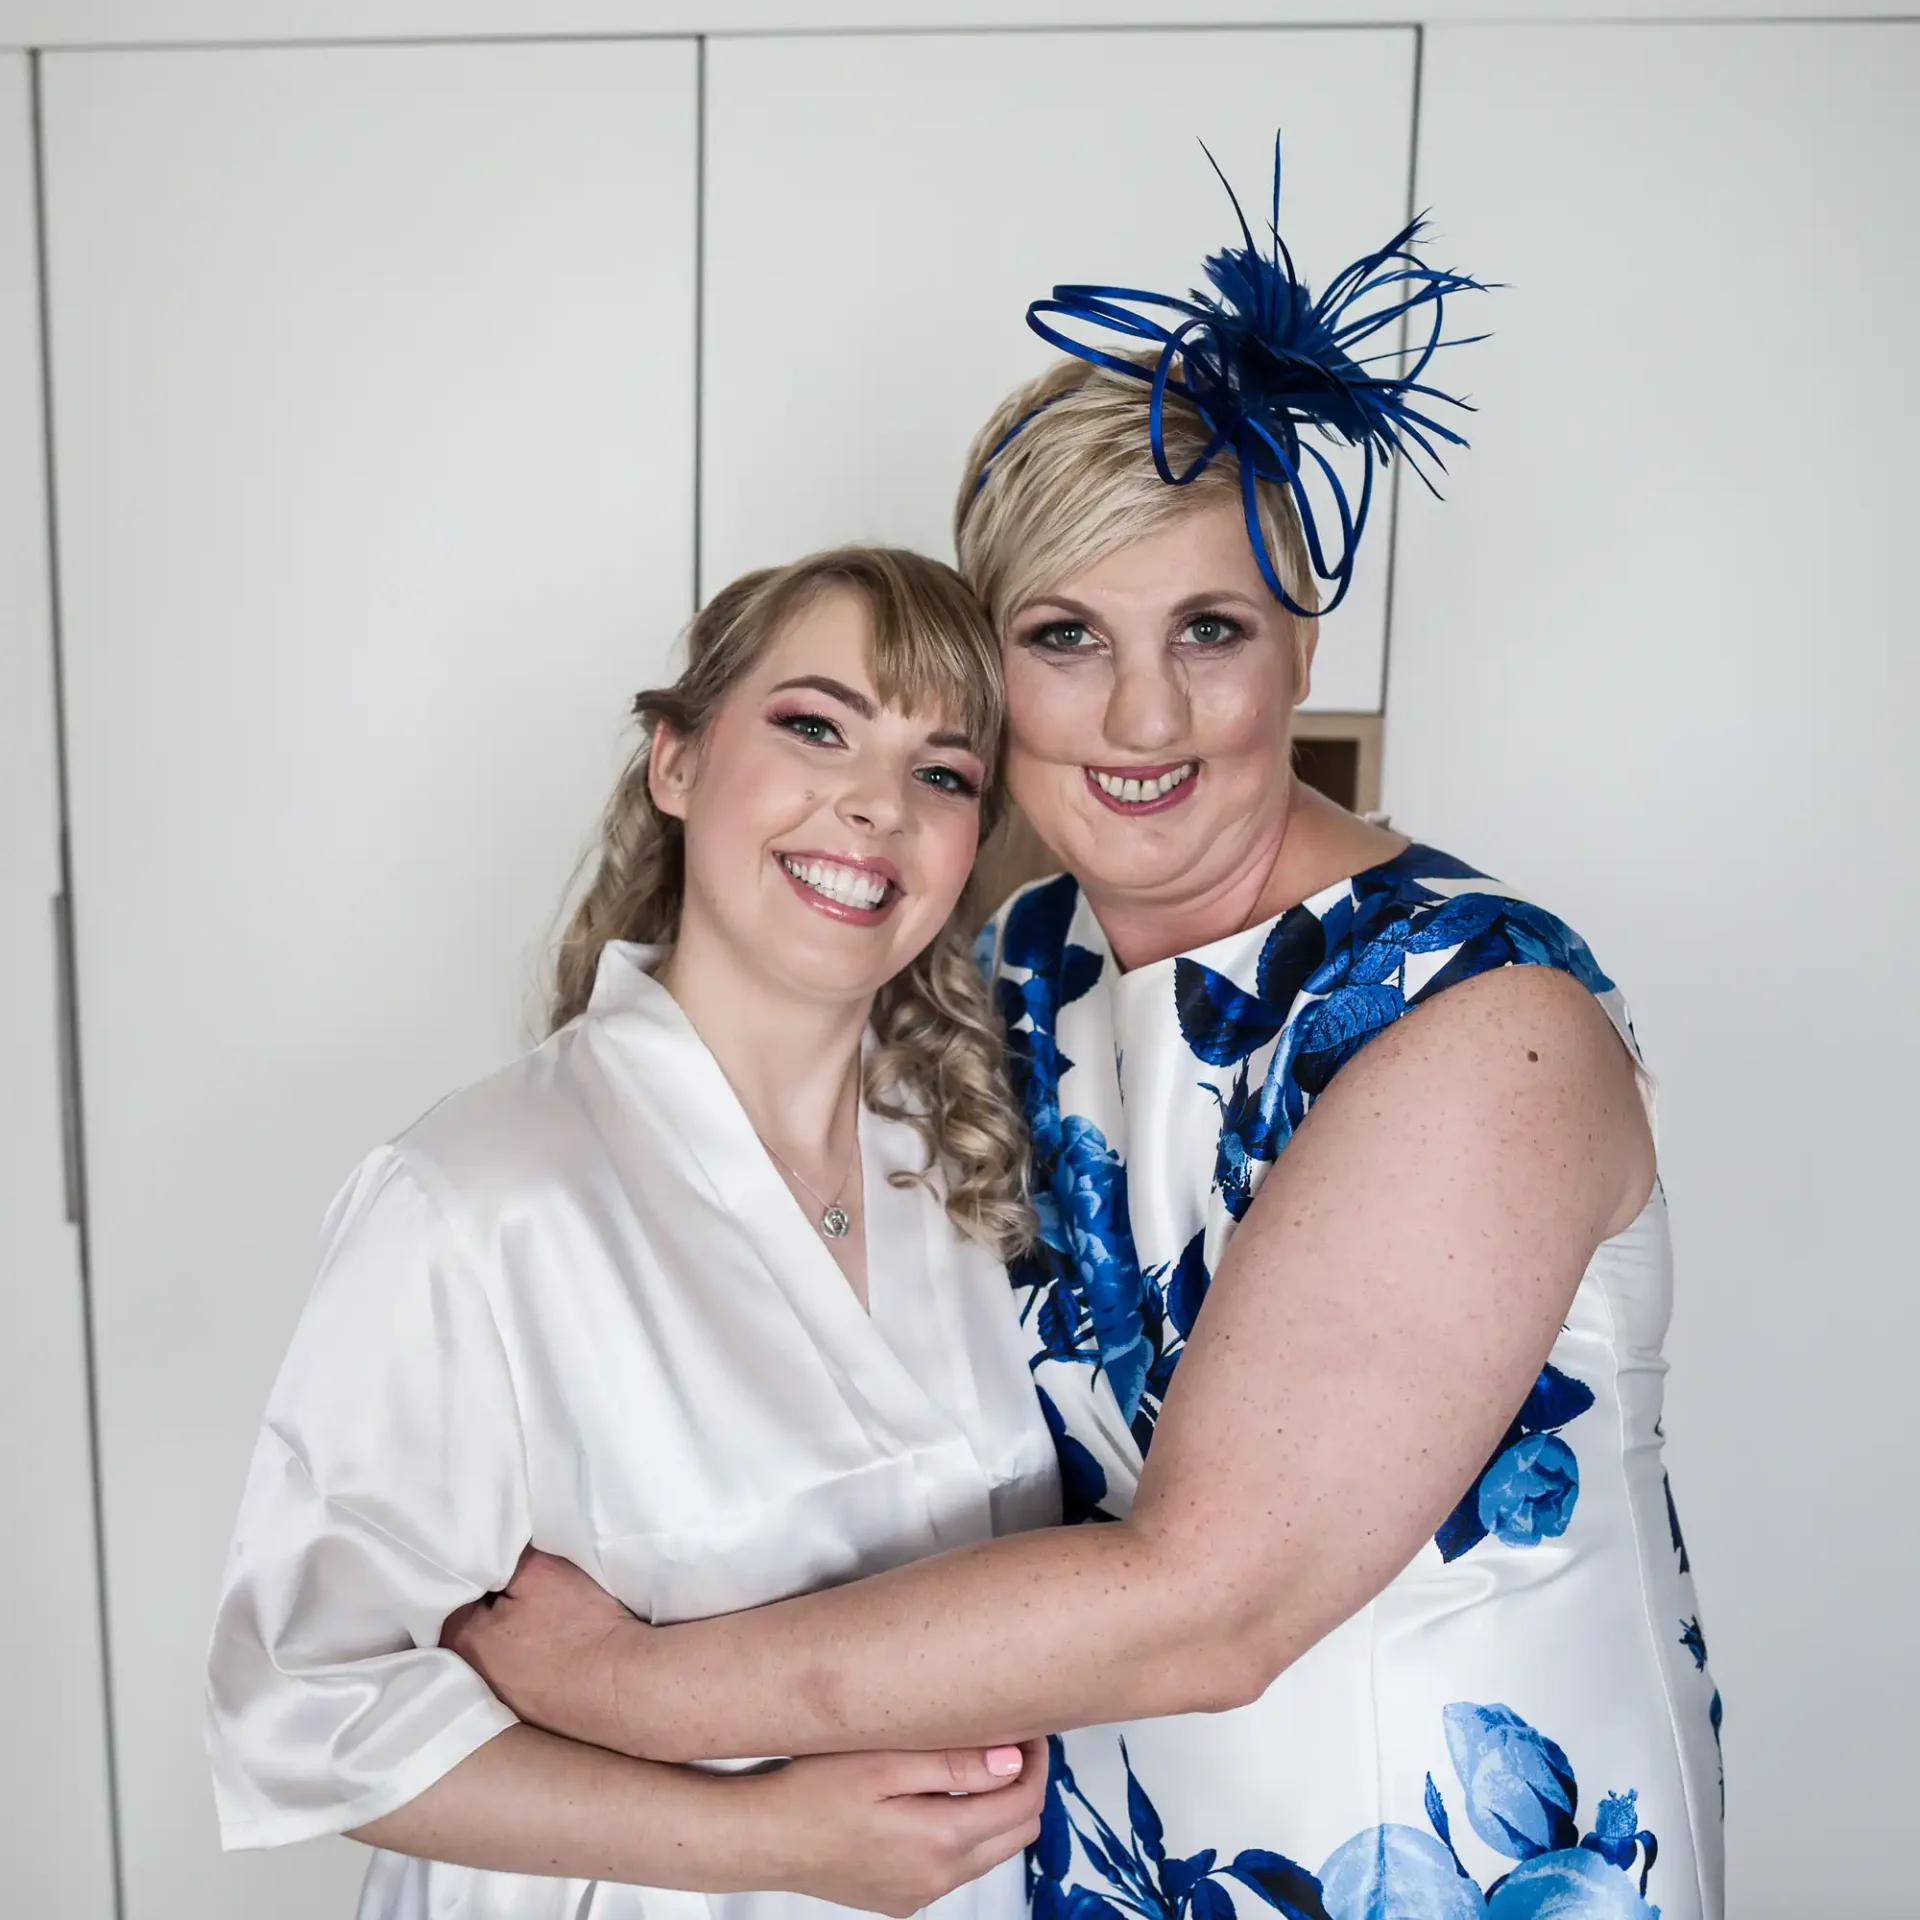 Two women smiling and embracing, one in a white robe and the other in a blue floral dress with a matching hat.